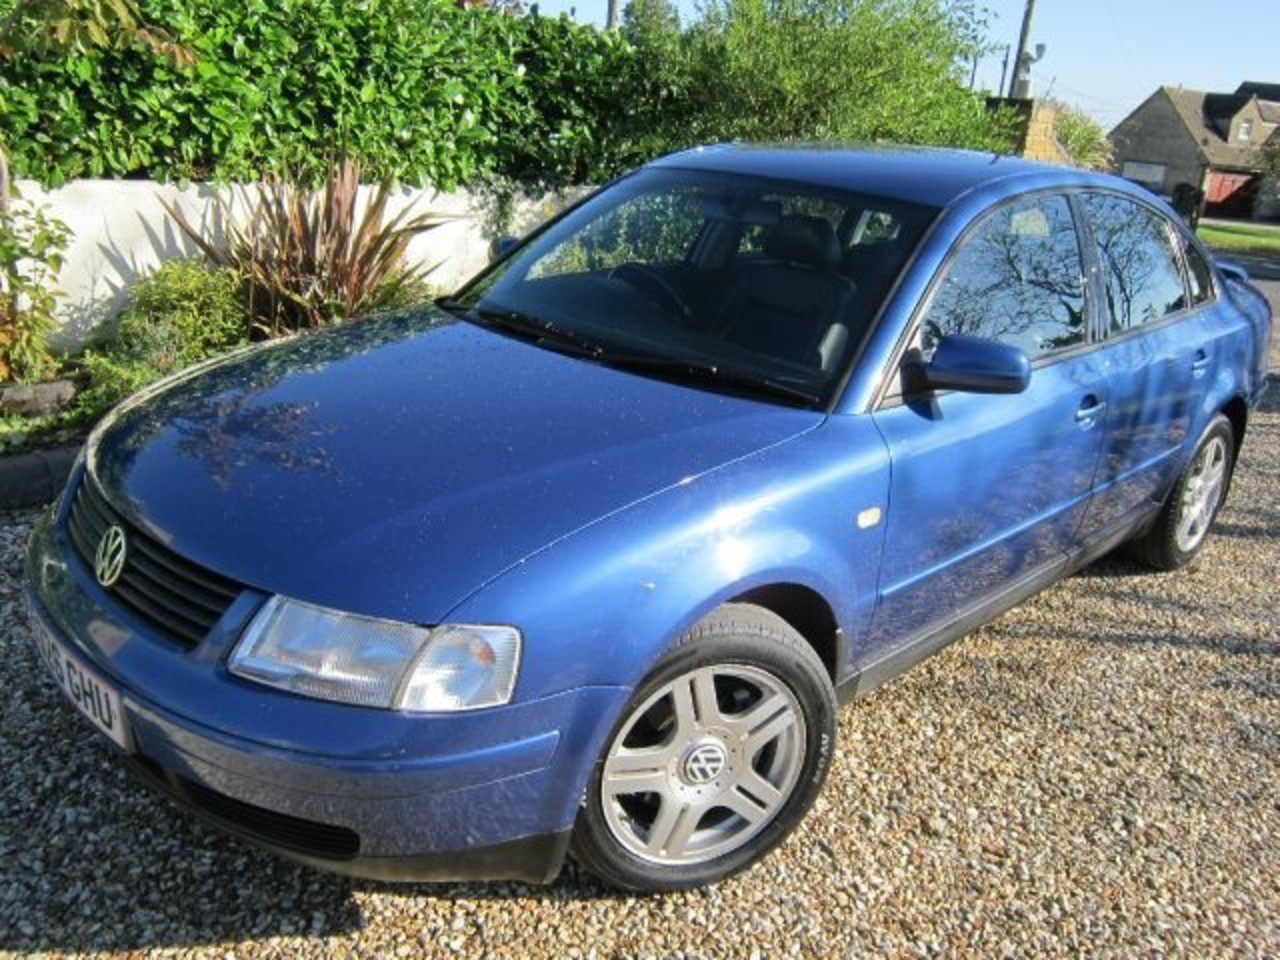 Volkswagen PASSAT V6 Syncro.FSH with 14 service stamps. Saloon 1999